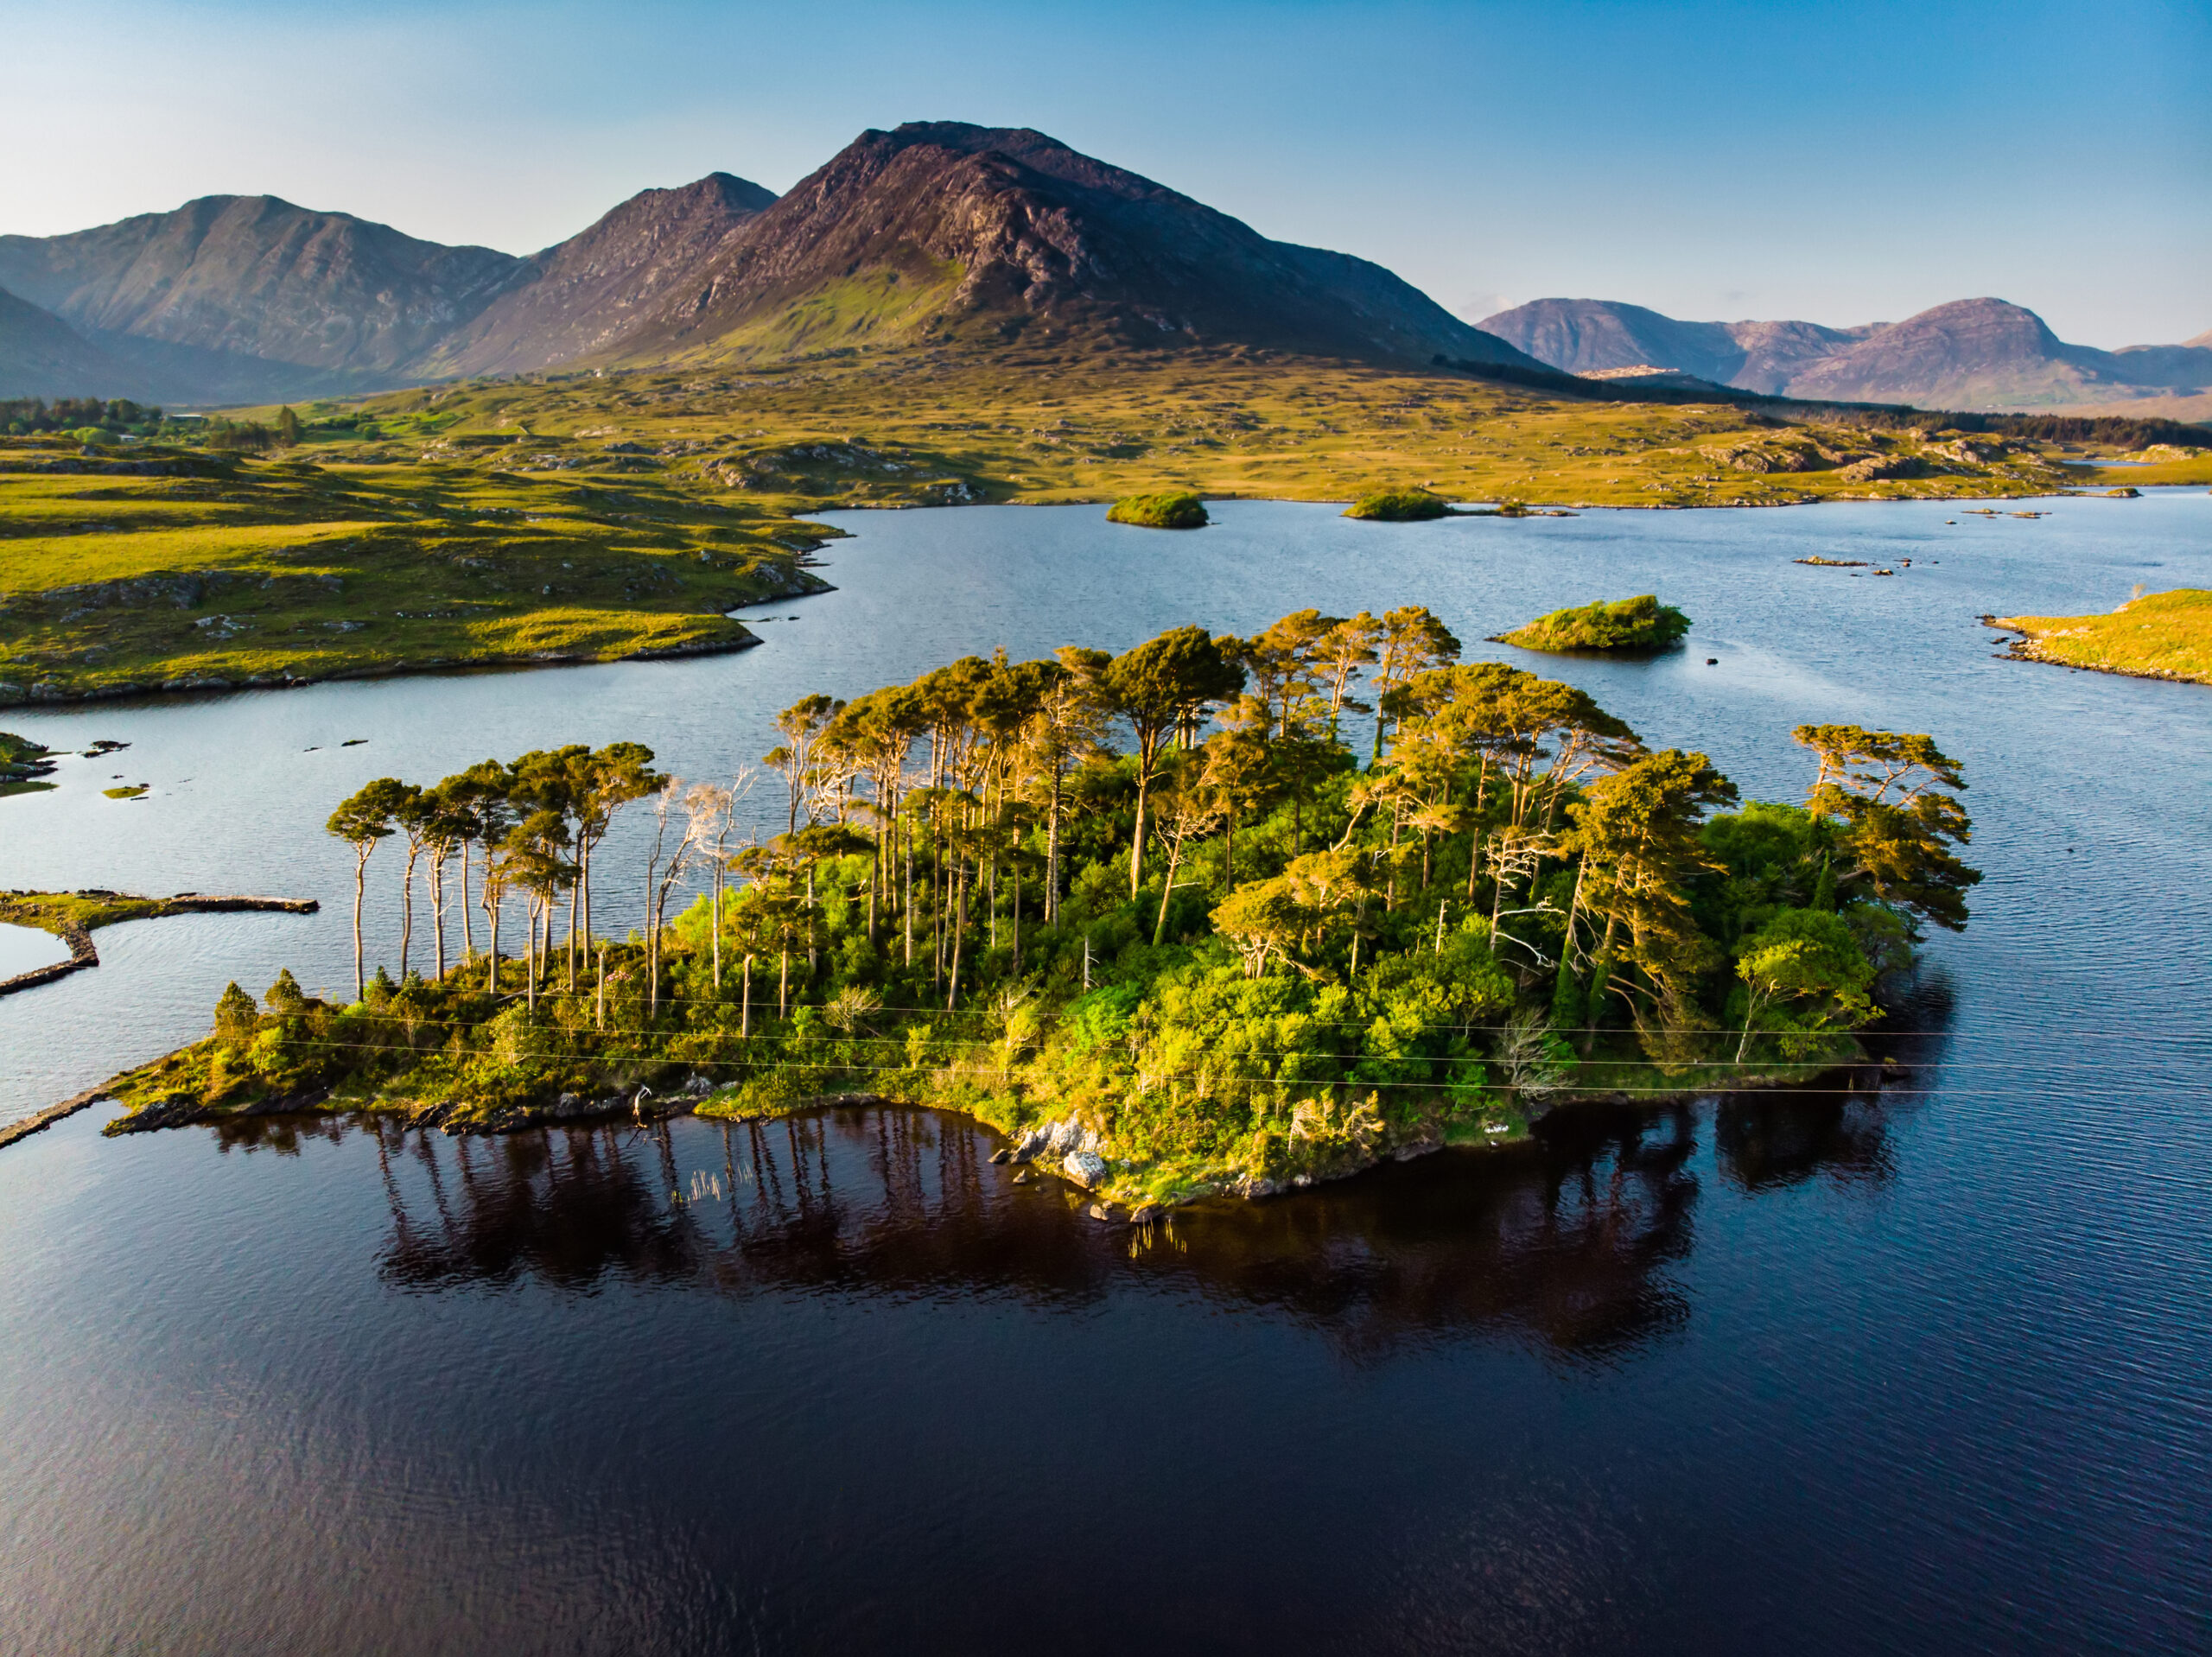 Aerial view of the famous pine island in Derryclare Lough, Ireland with Twelve Bens Mountain Range in the background. 